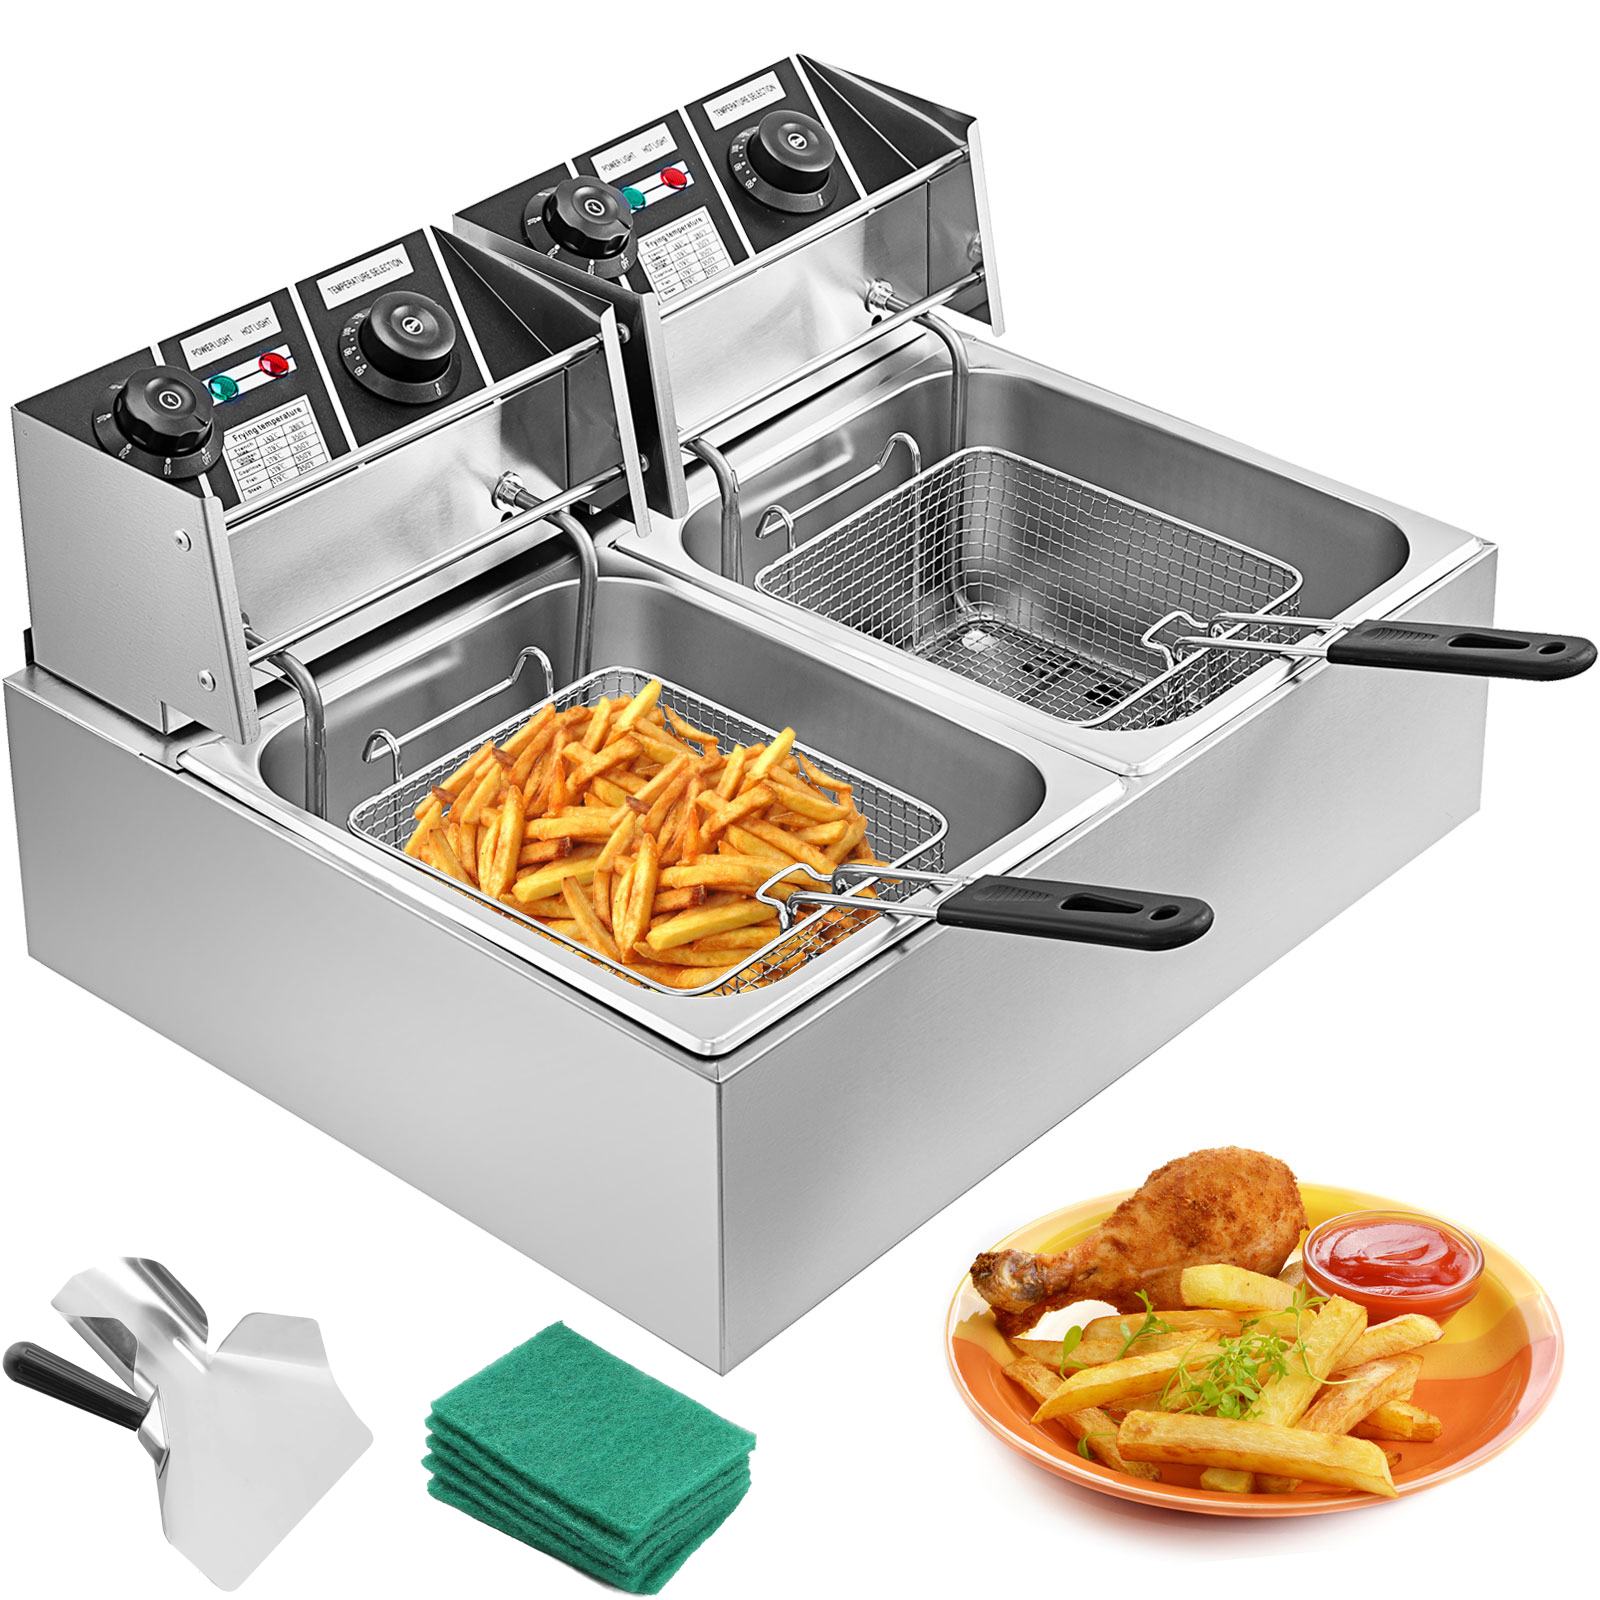 13 1/4 x 6 1/2 x 6 Deep Fryer Basket with Non-slip Handle Commercial Restaurant Kitchen Chip Fish pack of 2 